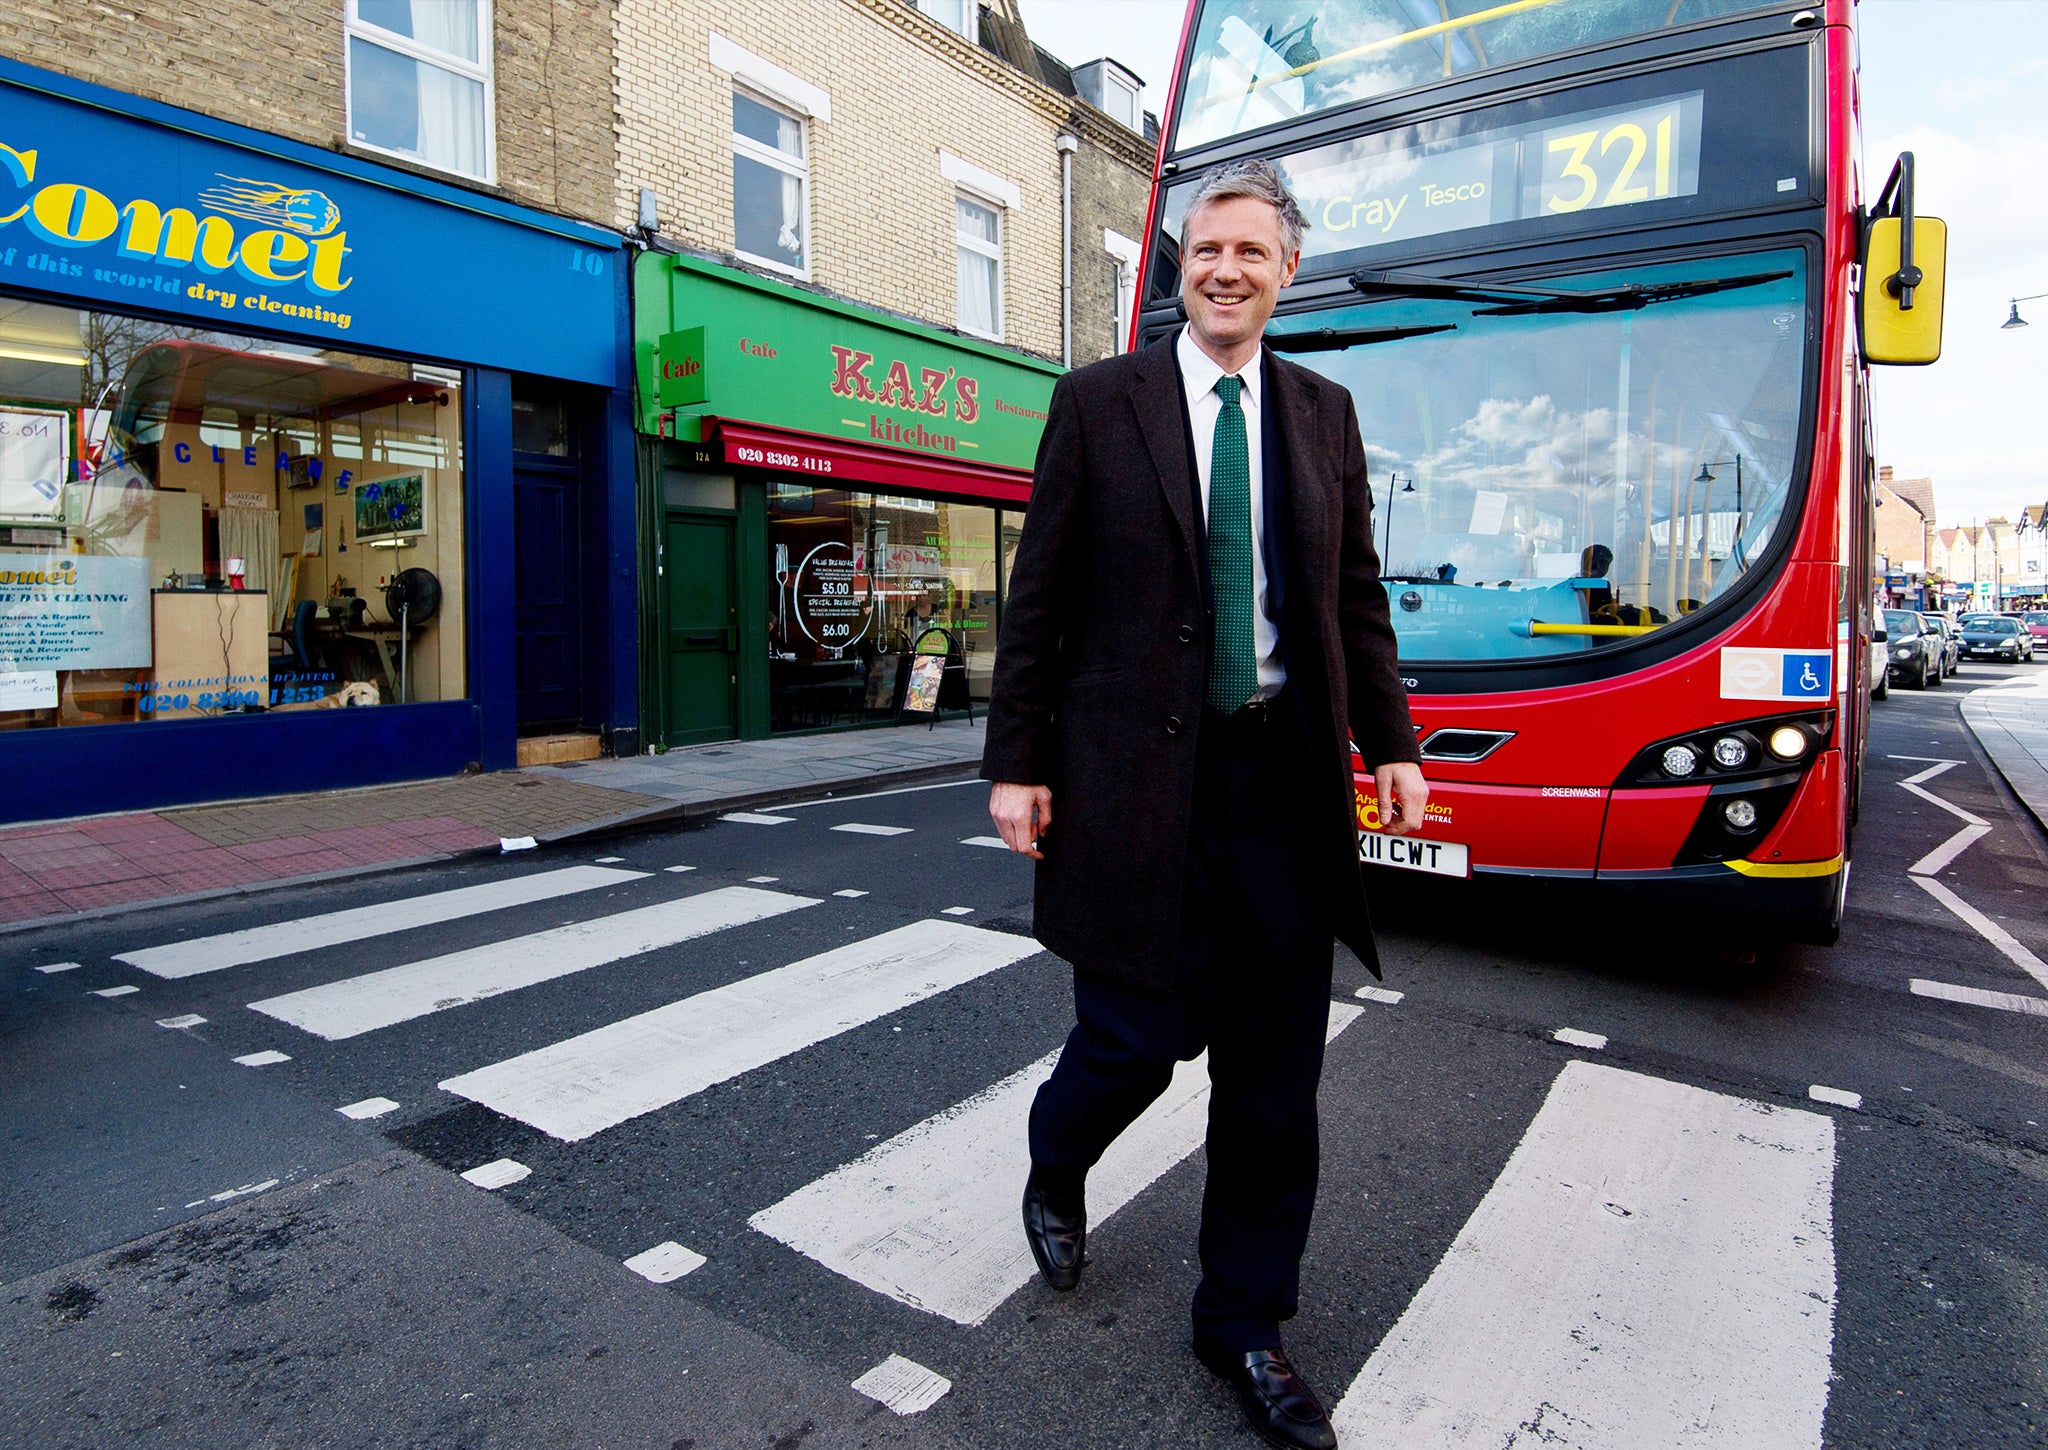 Conservative mayoral candidate Zac Goldsmith visits Sidcup High Steet during his campaign tour on March 3, 2016 in Sidcup, England.